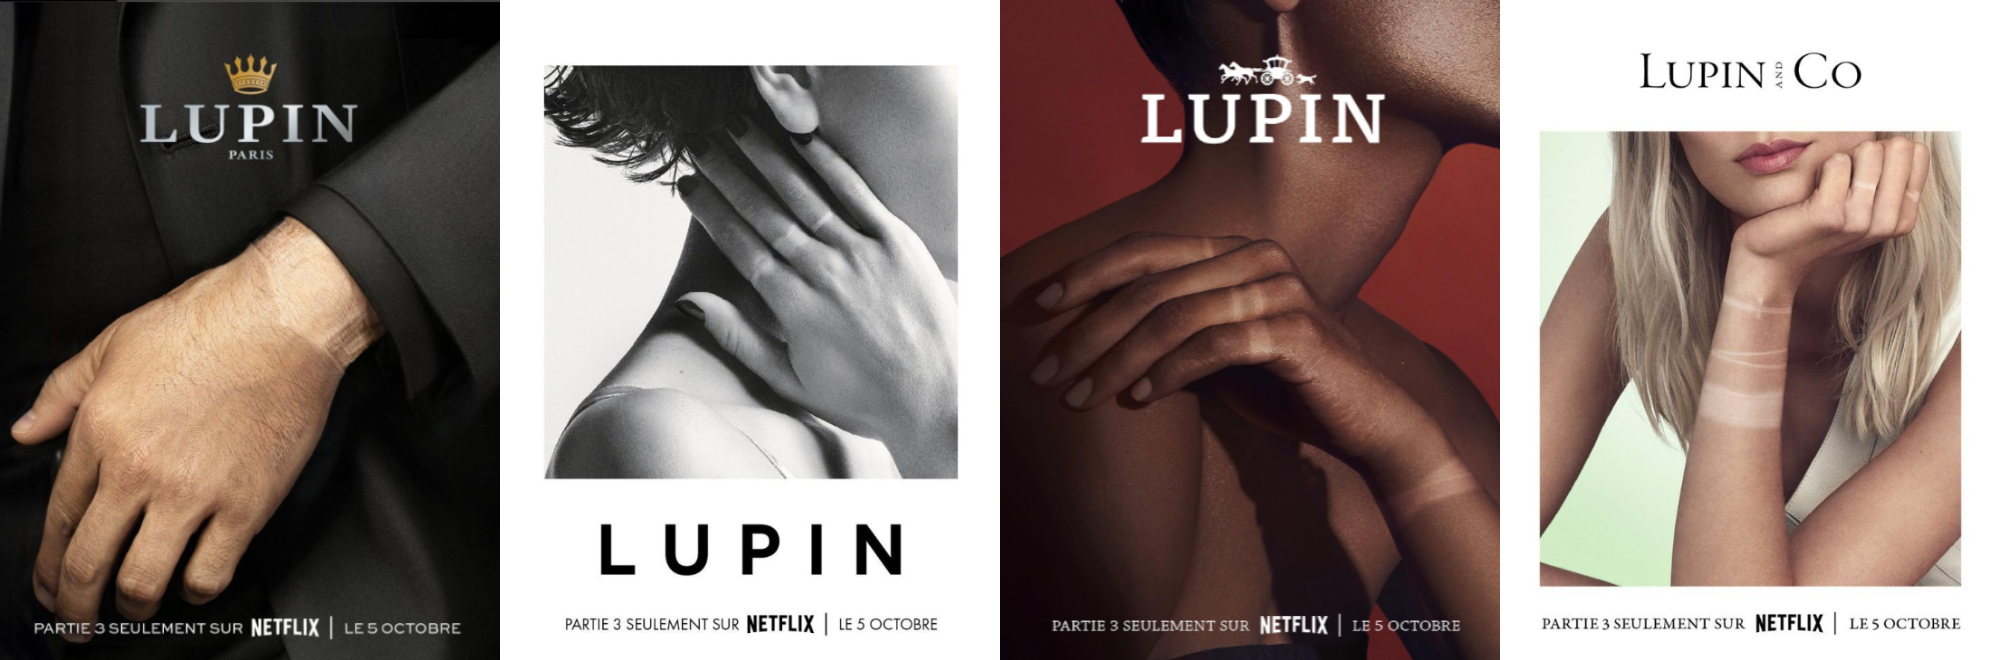 Netflix steals the show with posters to advertise French TV series Lupin